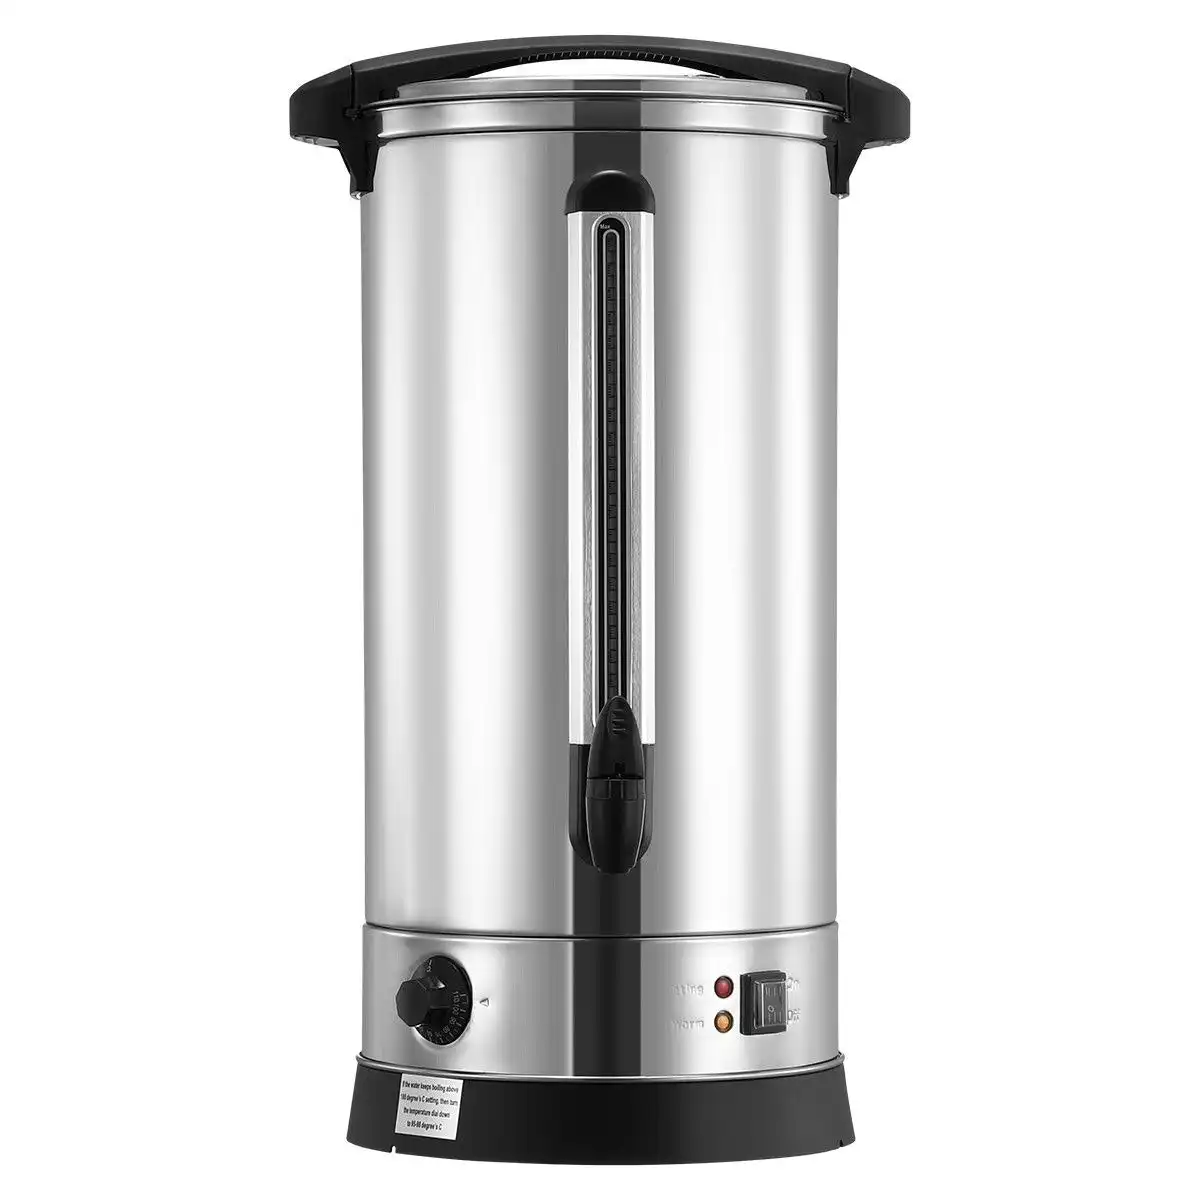 Maxim Kitchenpro 8L Electric Stainless Steel Urn/Hot Water Boiler Silver